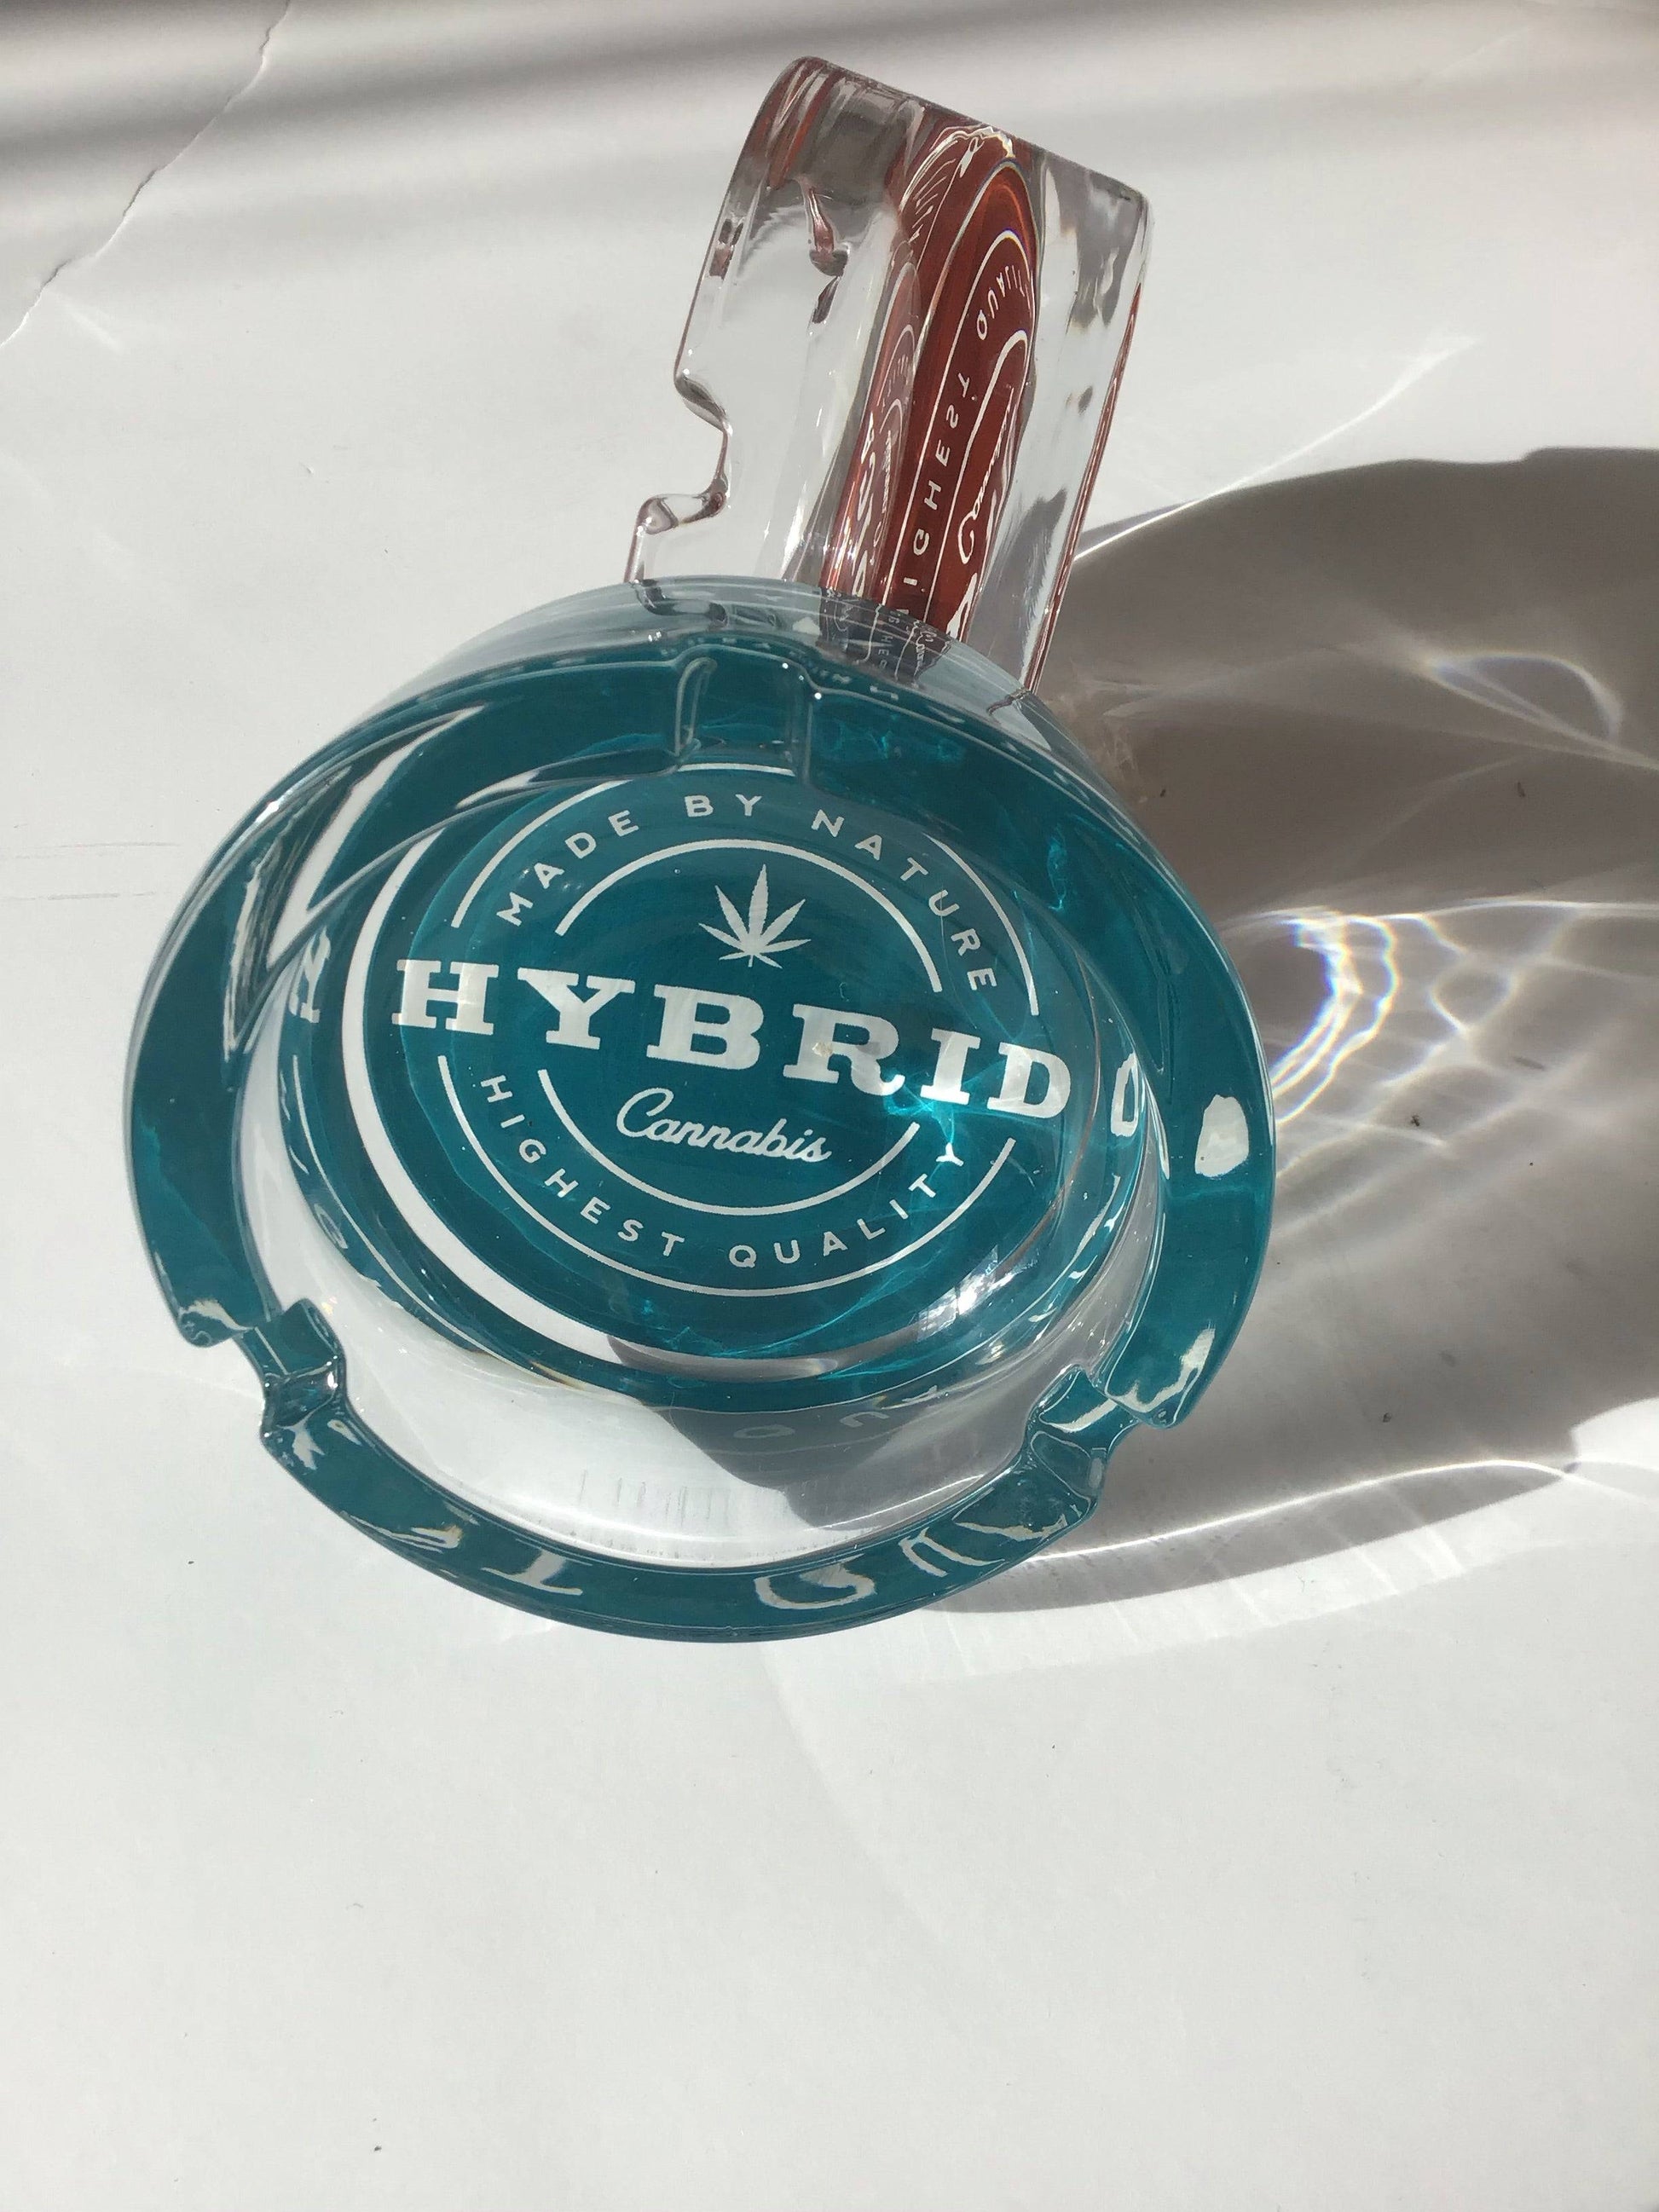 Hybrid Highest Quality Design Durable Glass Ashtray yoga smokes yoga studio, delivery, delivery near me, yoga smokes smoke shop, find smoke shop, head shop near me, yoga studio, headshop, head shop, local smoke shop, psl, psl smoke shop, smoke shop, smokeshop, yoga, yoga studio, dispensary, local dispensary, smokeshop near me, port saint lucie, florida, port st lucie, lounge, life, highlife, love, stoned, highsociety. Yoga Smokes